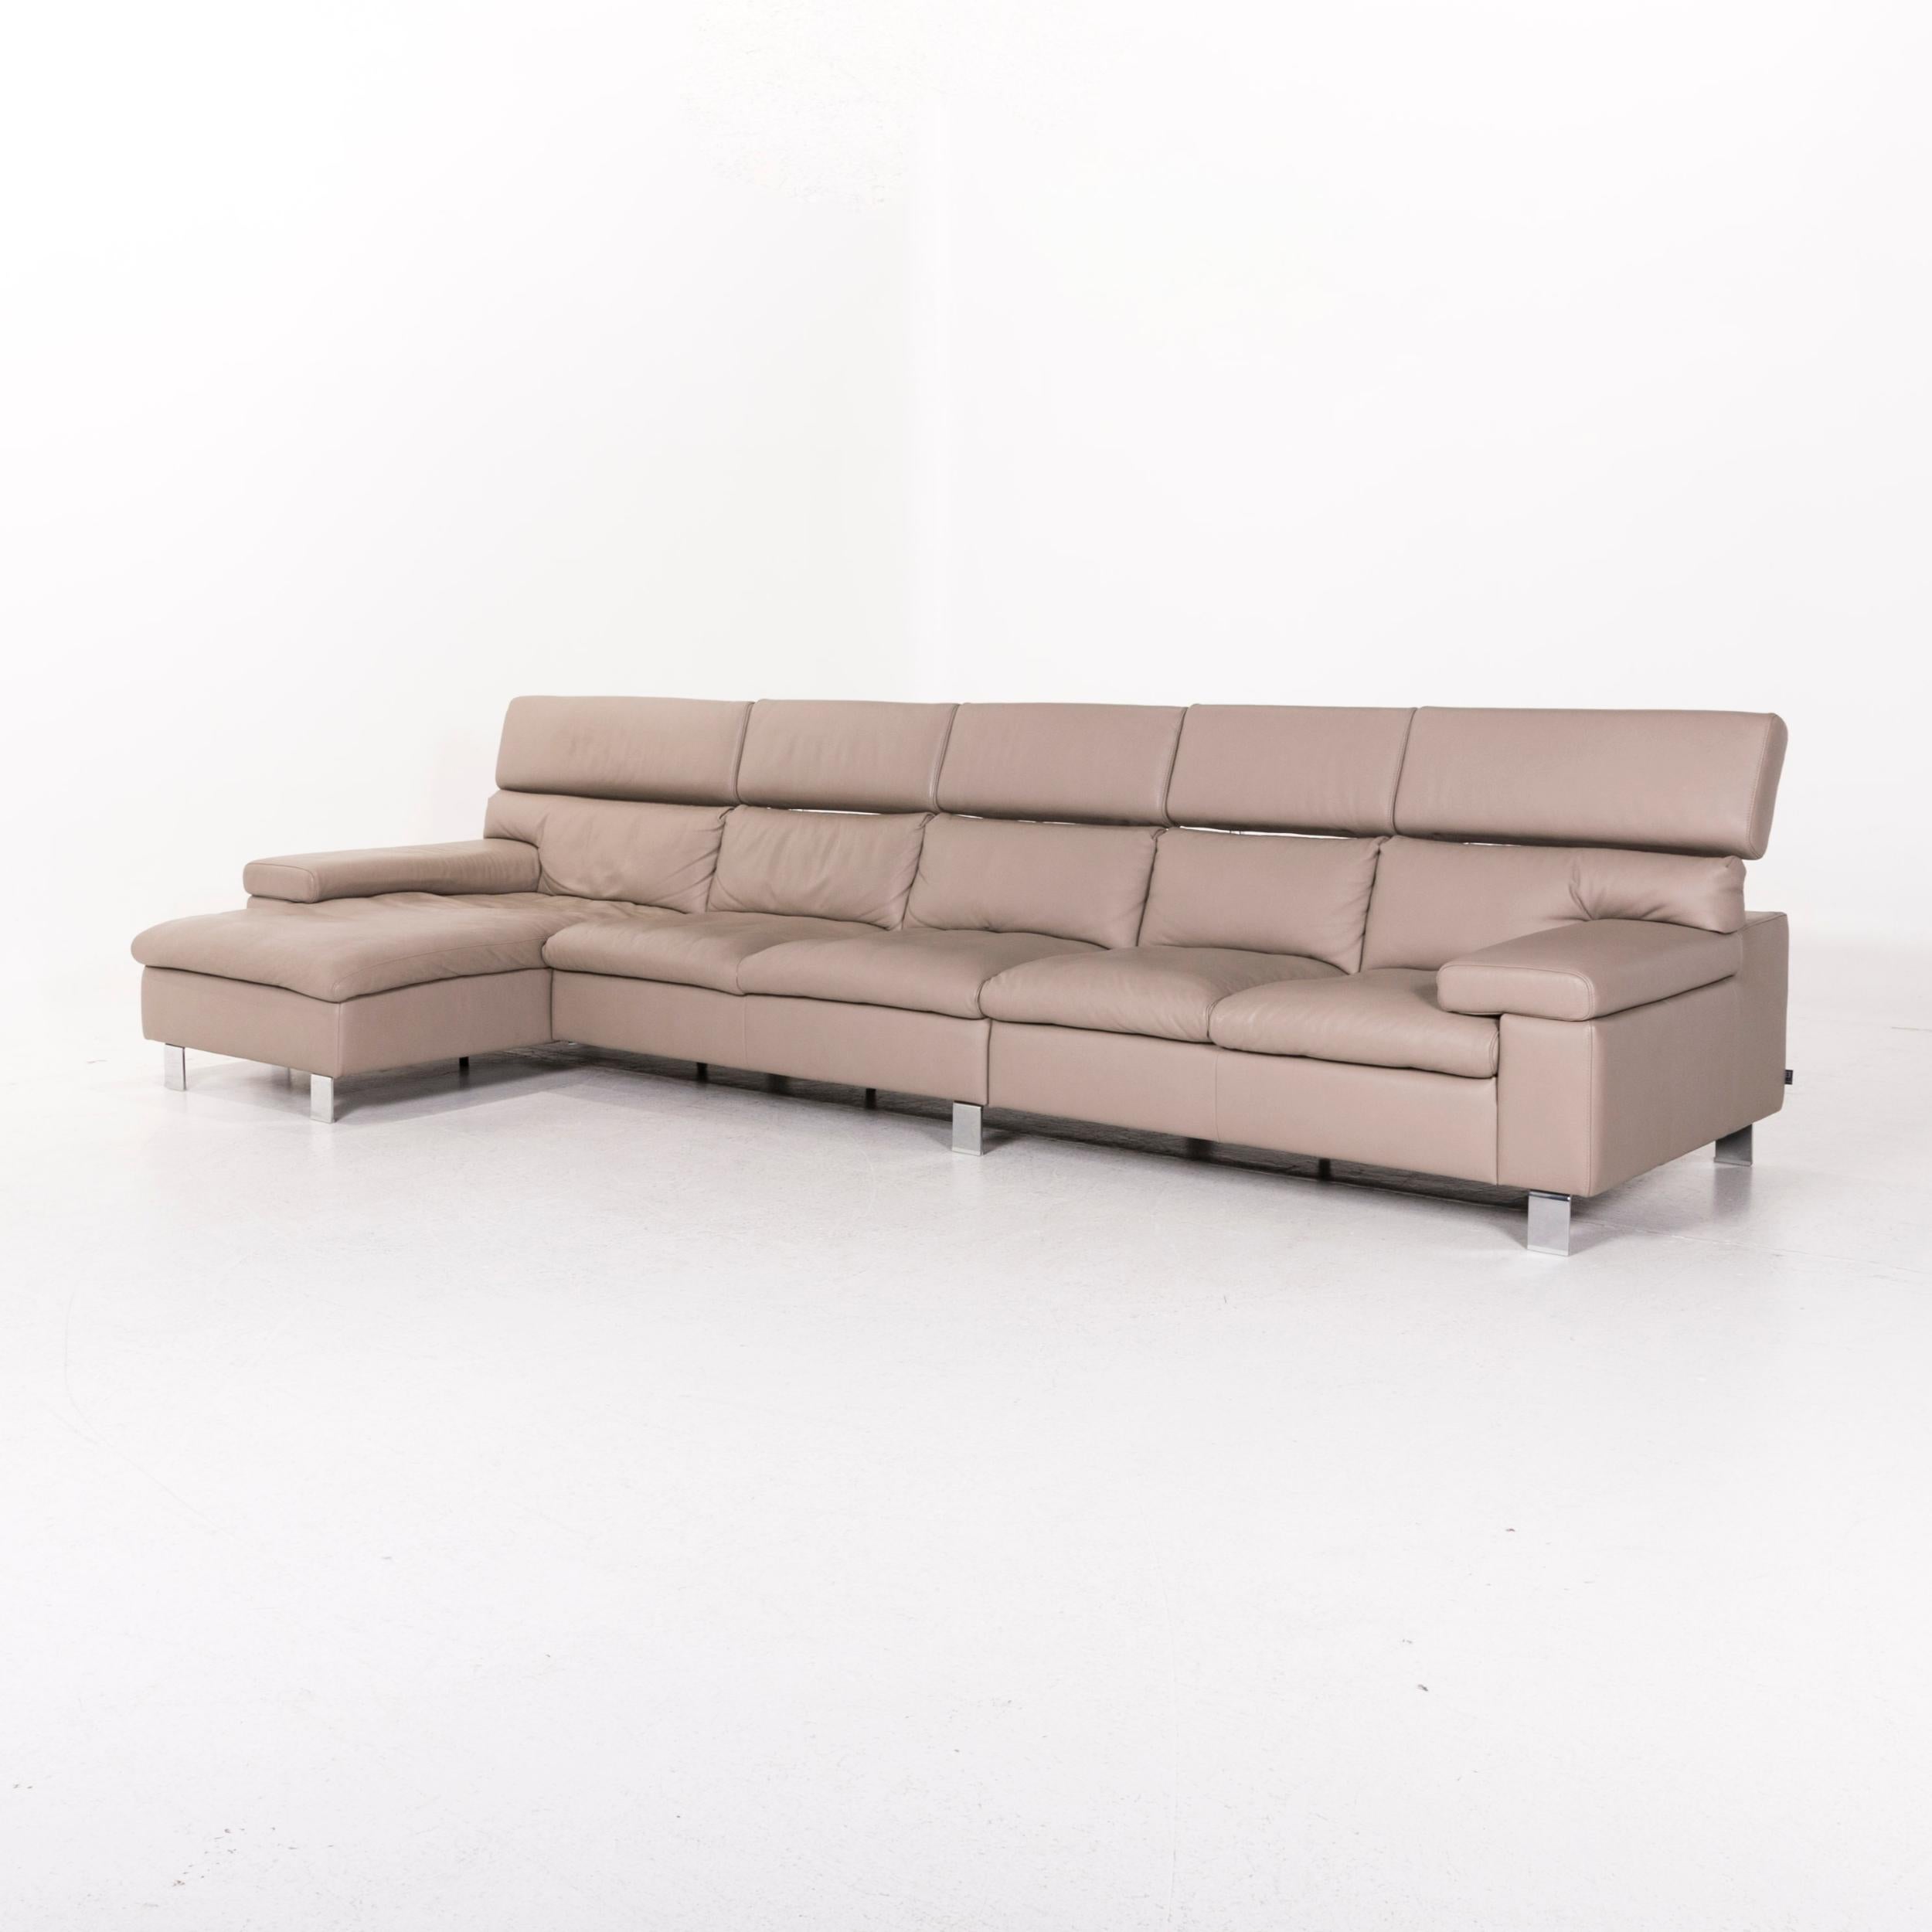 We bring to you an Ewald Schillig leather corner sofa brown gray beige cappucino sofa couch.

 

 Product measurements in centimeters:
 

Depth 108
Width 171
Height 68
Seat-height 43
Rest-height 54
Seat-depth 58
Seat-width